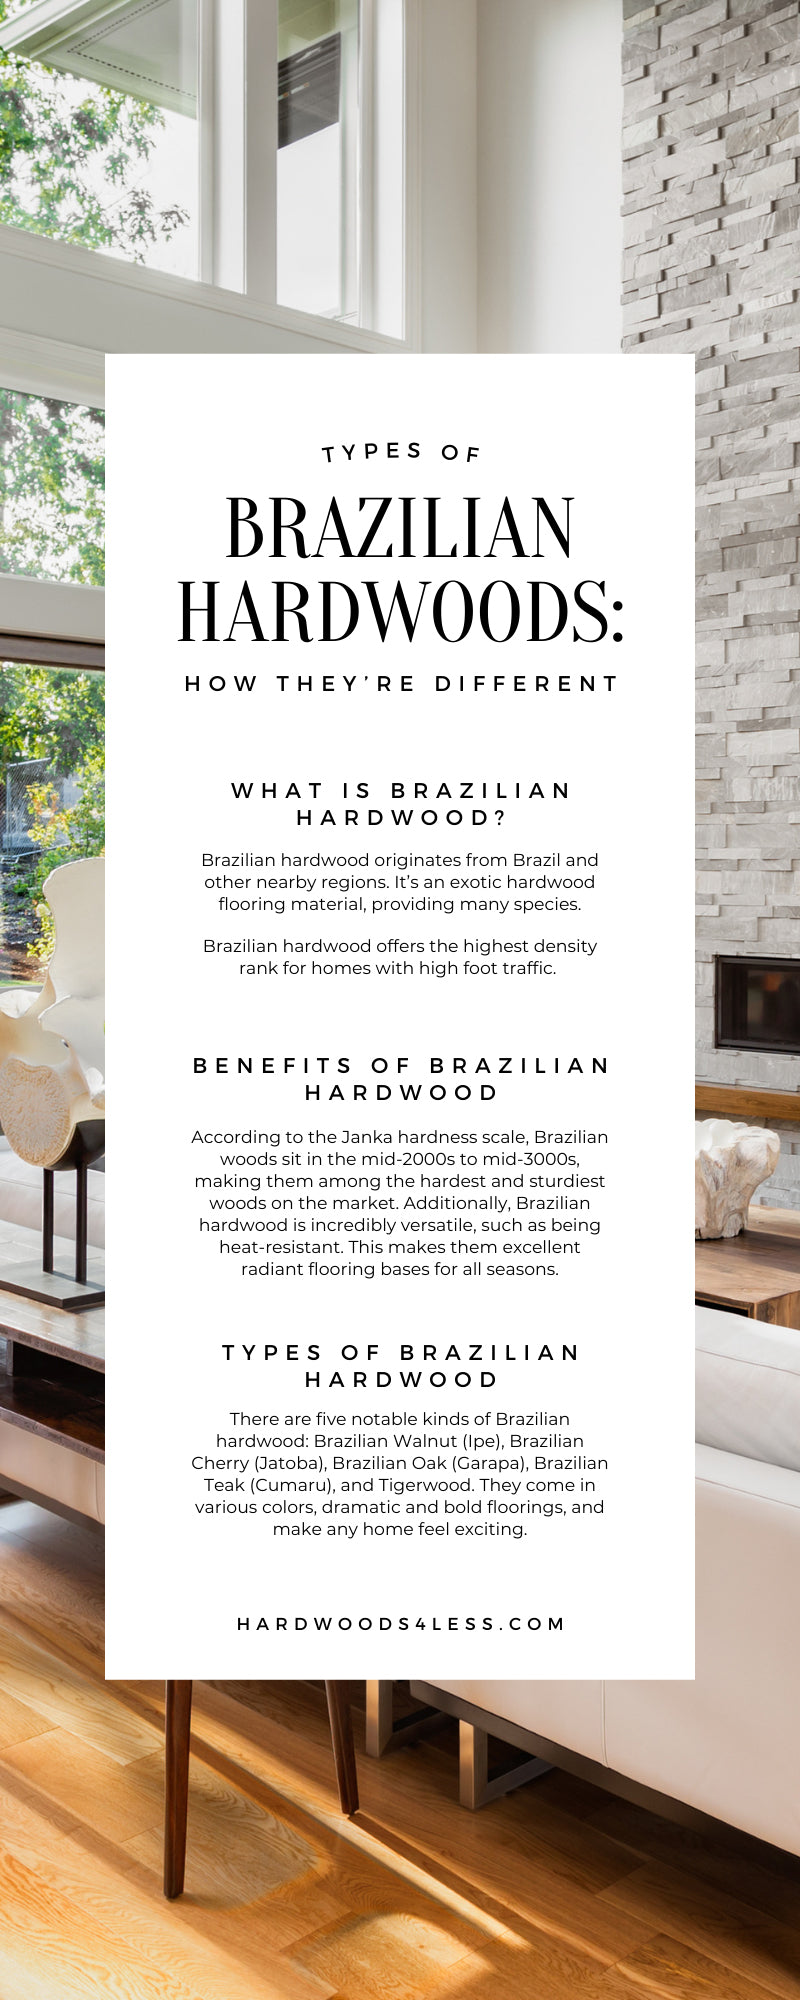 Types of Brazilian Hardwoods: How They’re Different